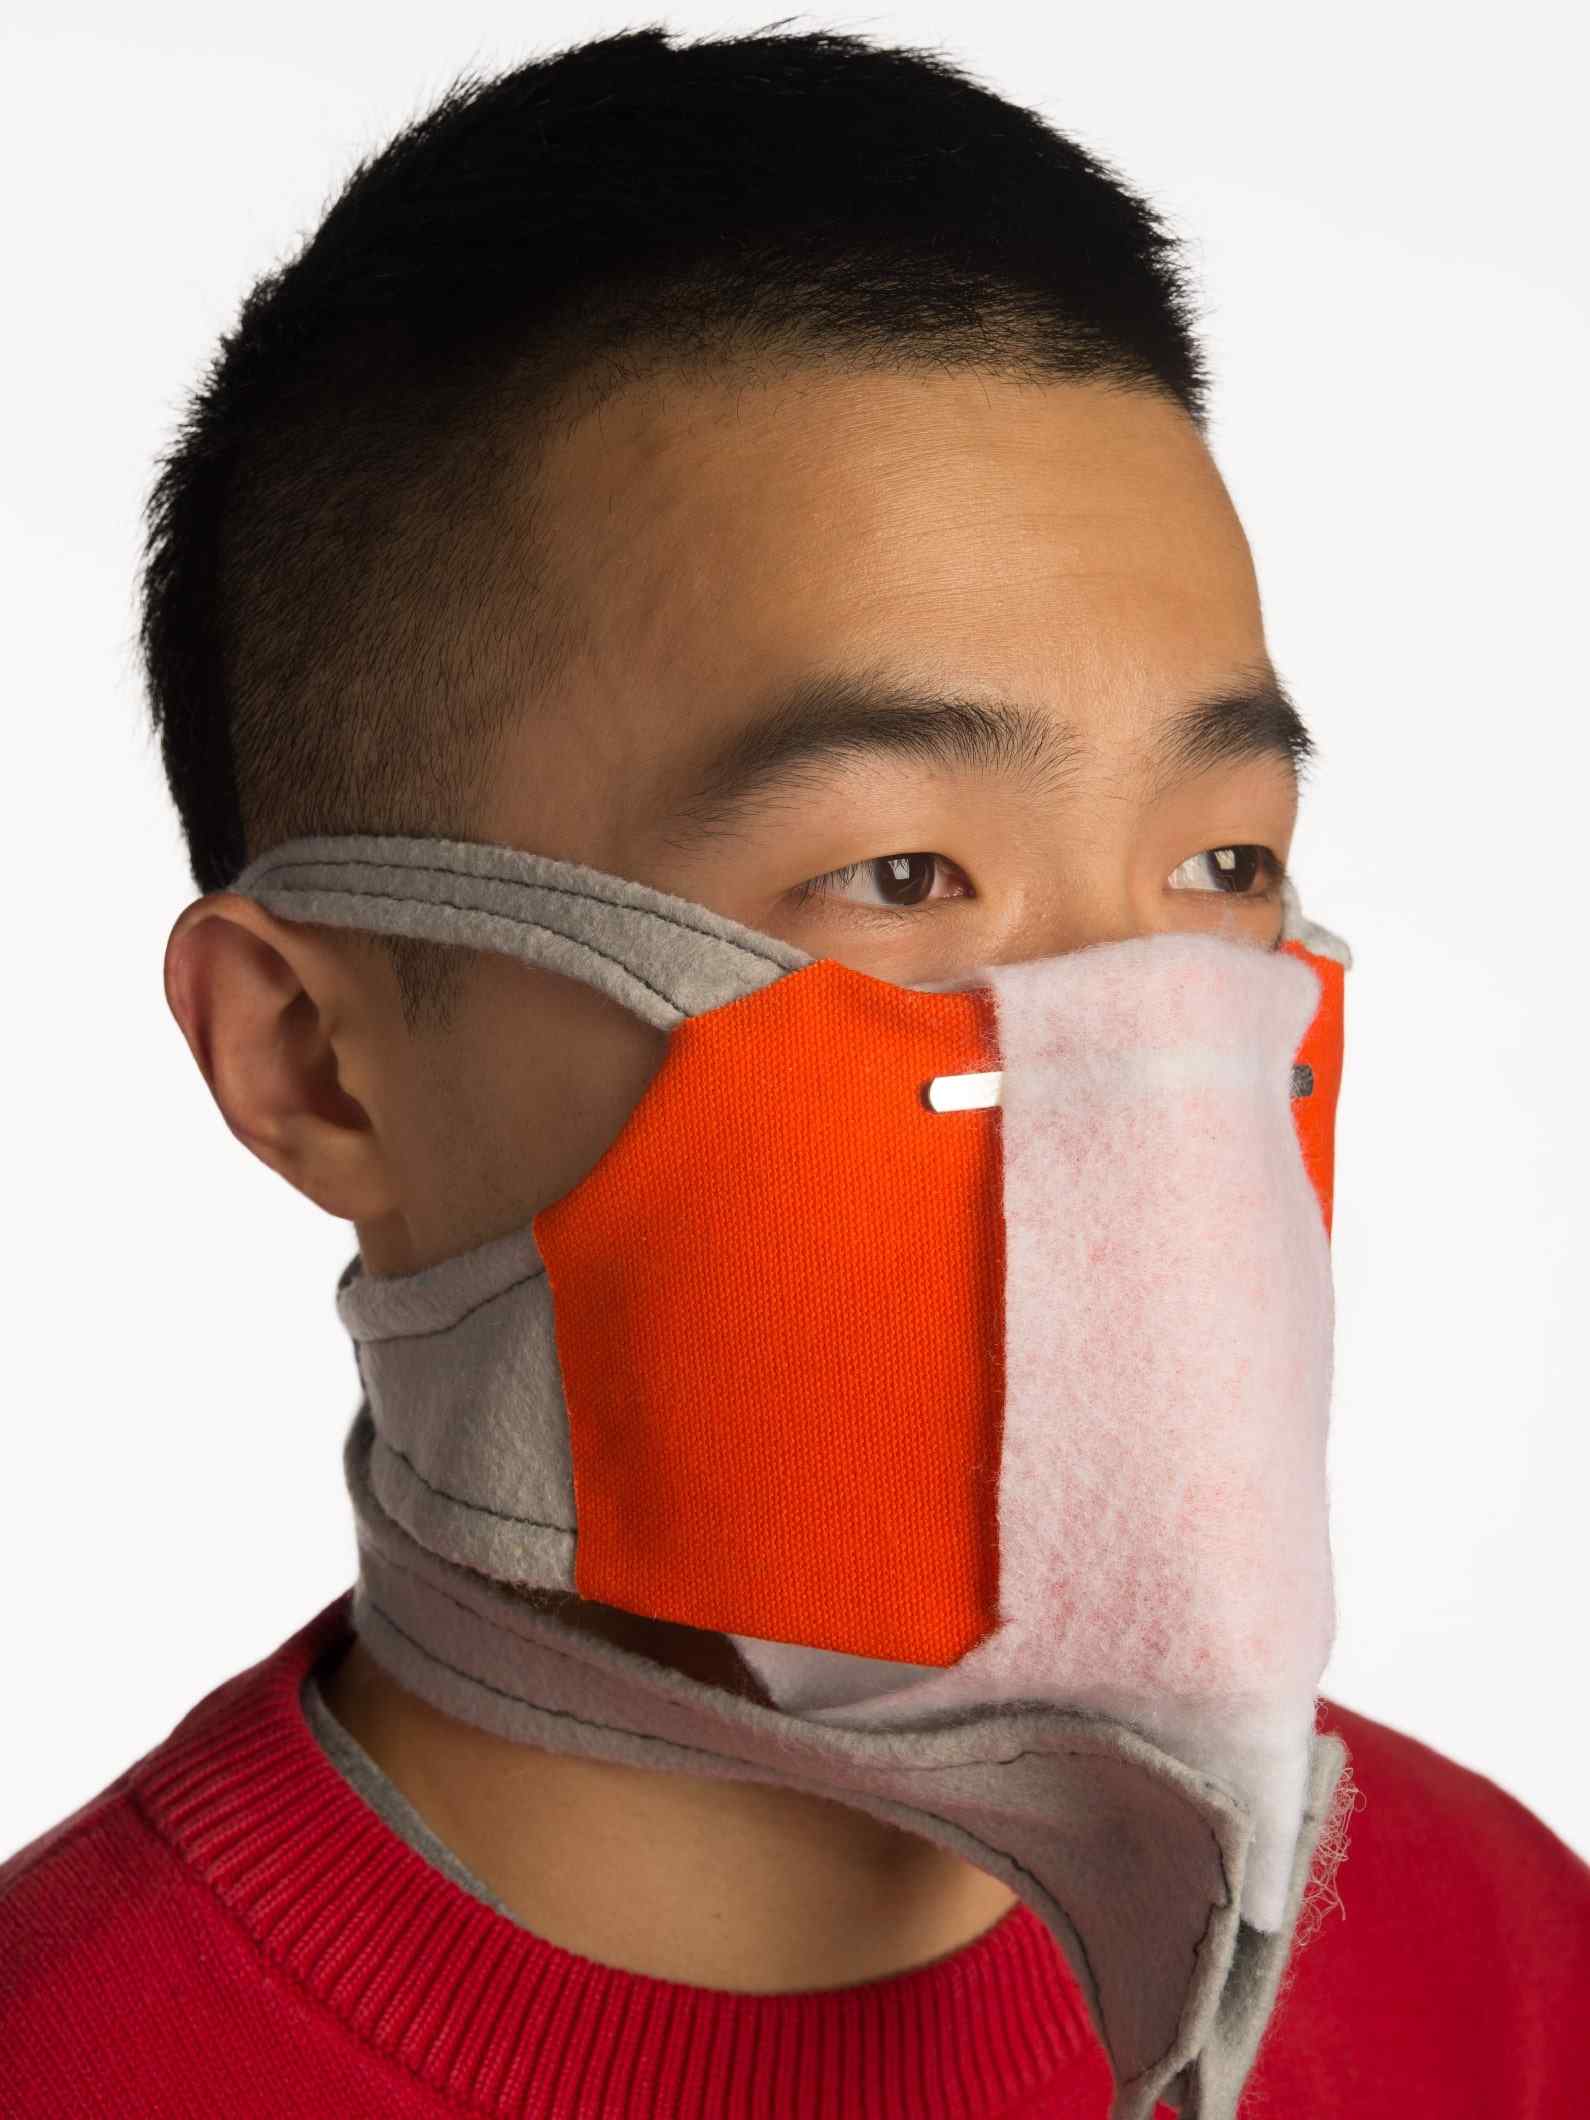 product photoshoot showing a person wearing an alternative fabric based respirator